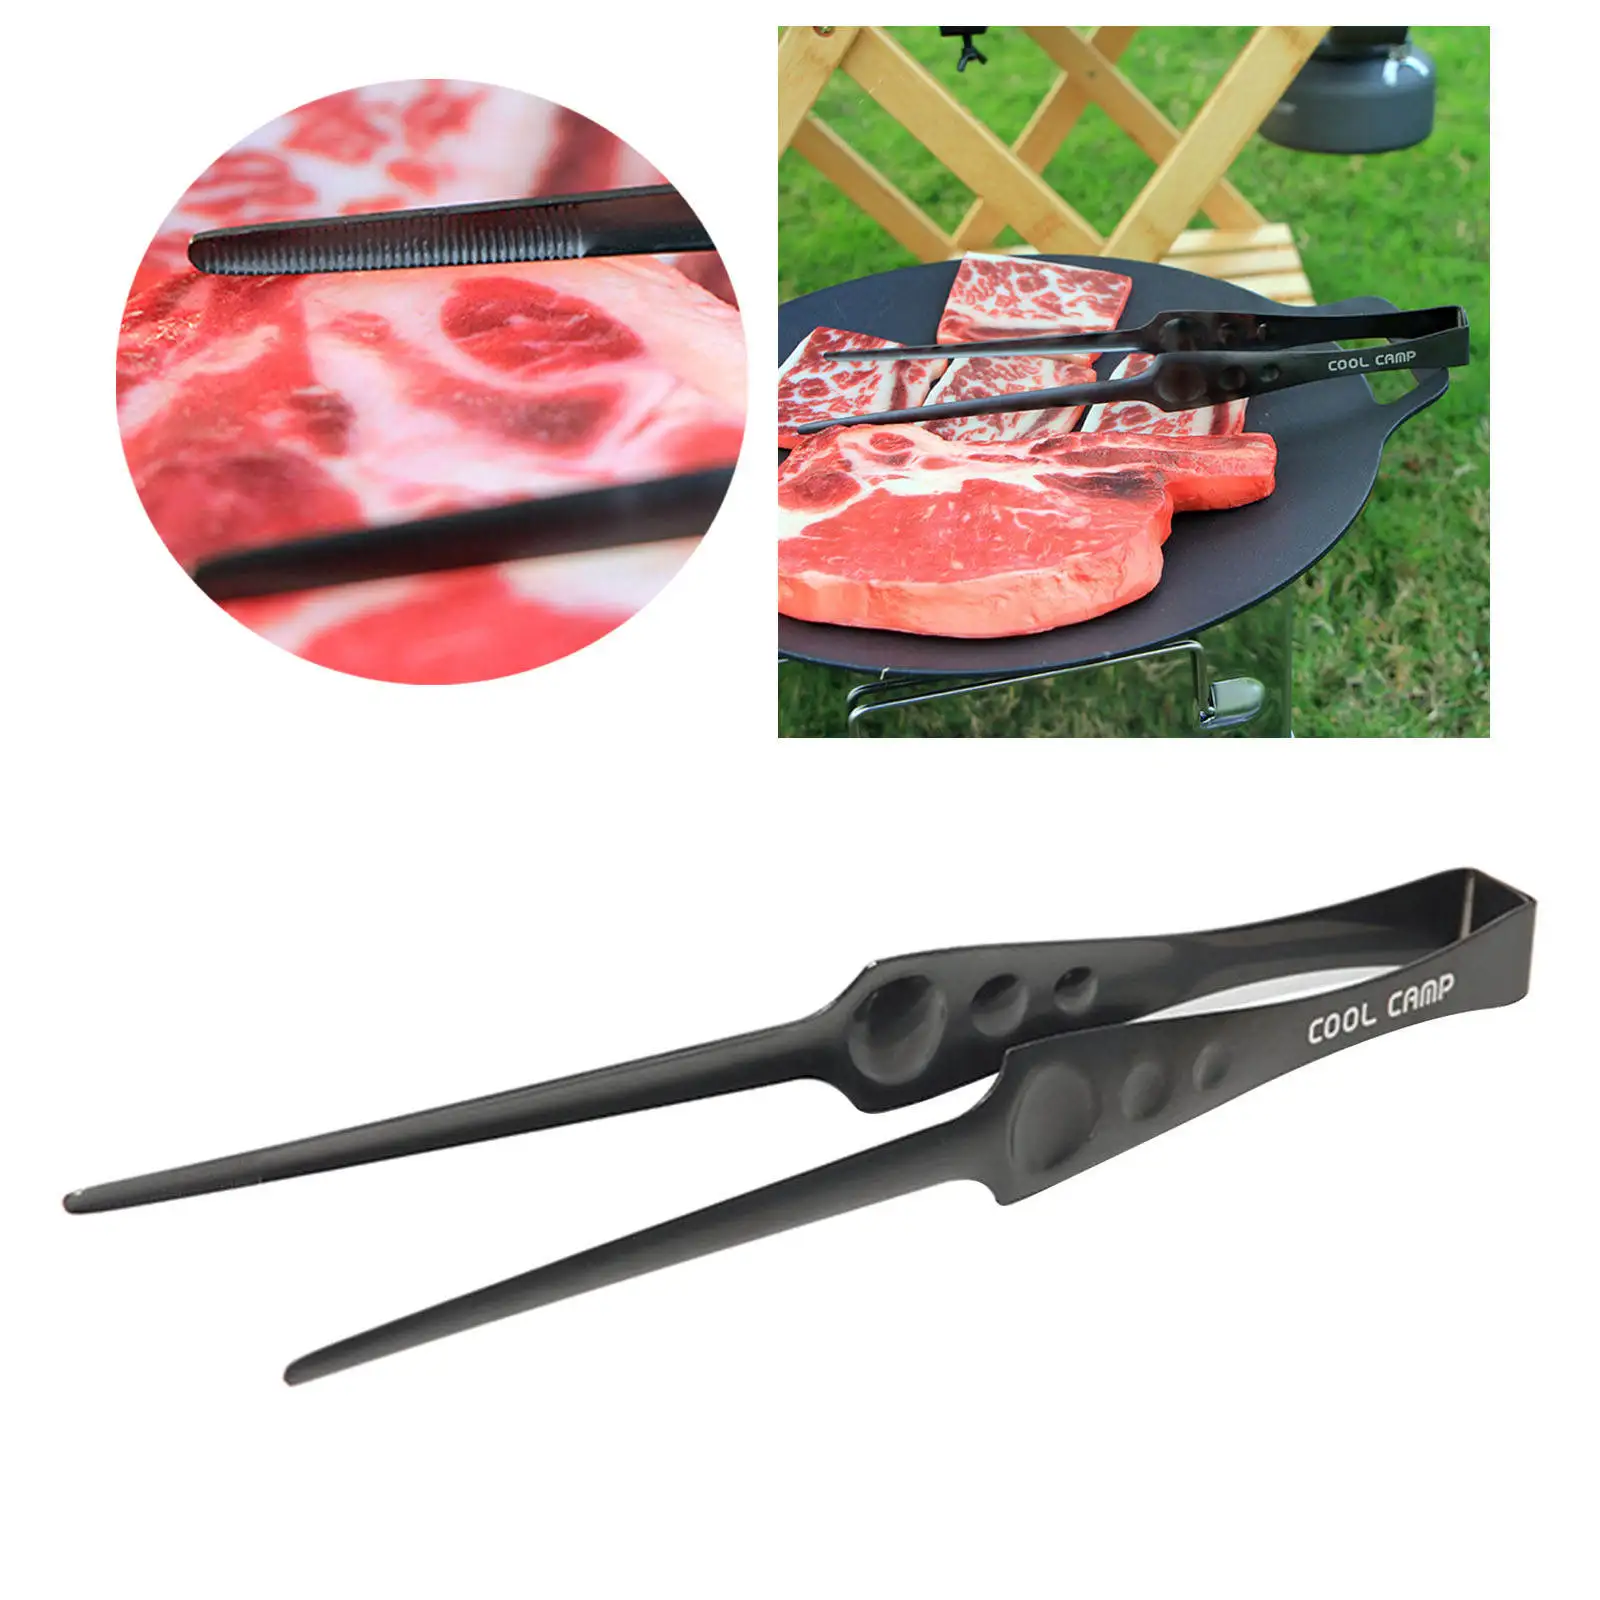 Grill Tongs Clip Tweezer Barbecue Lightweight Clamp Multi-Purpose Tool Long Cooking Utensil for Food Cake Bacon Kitchen Baking